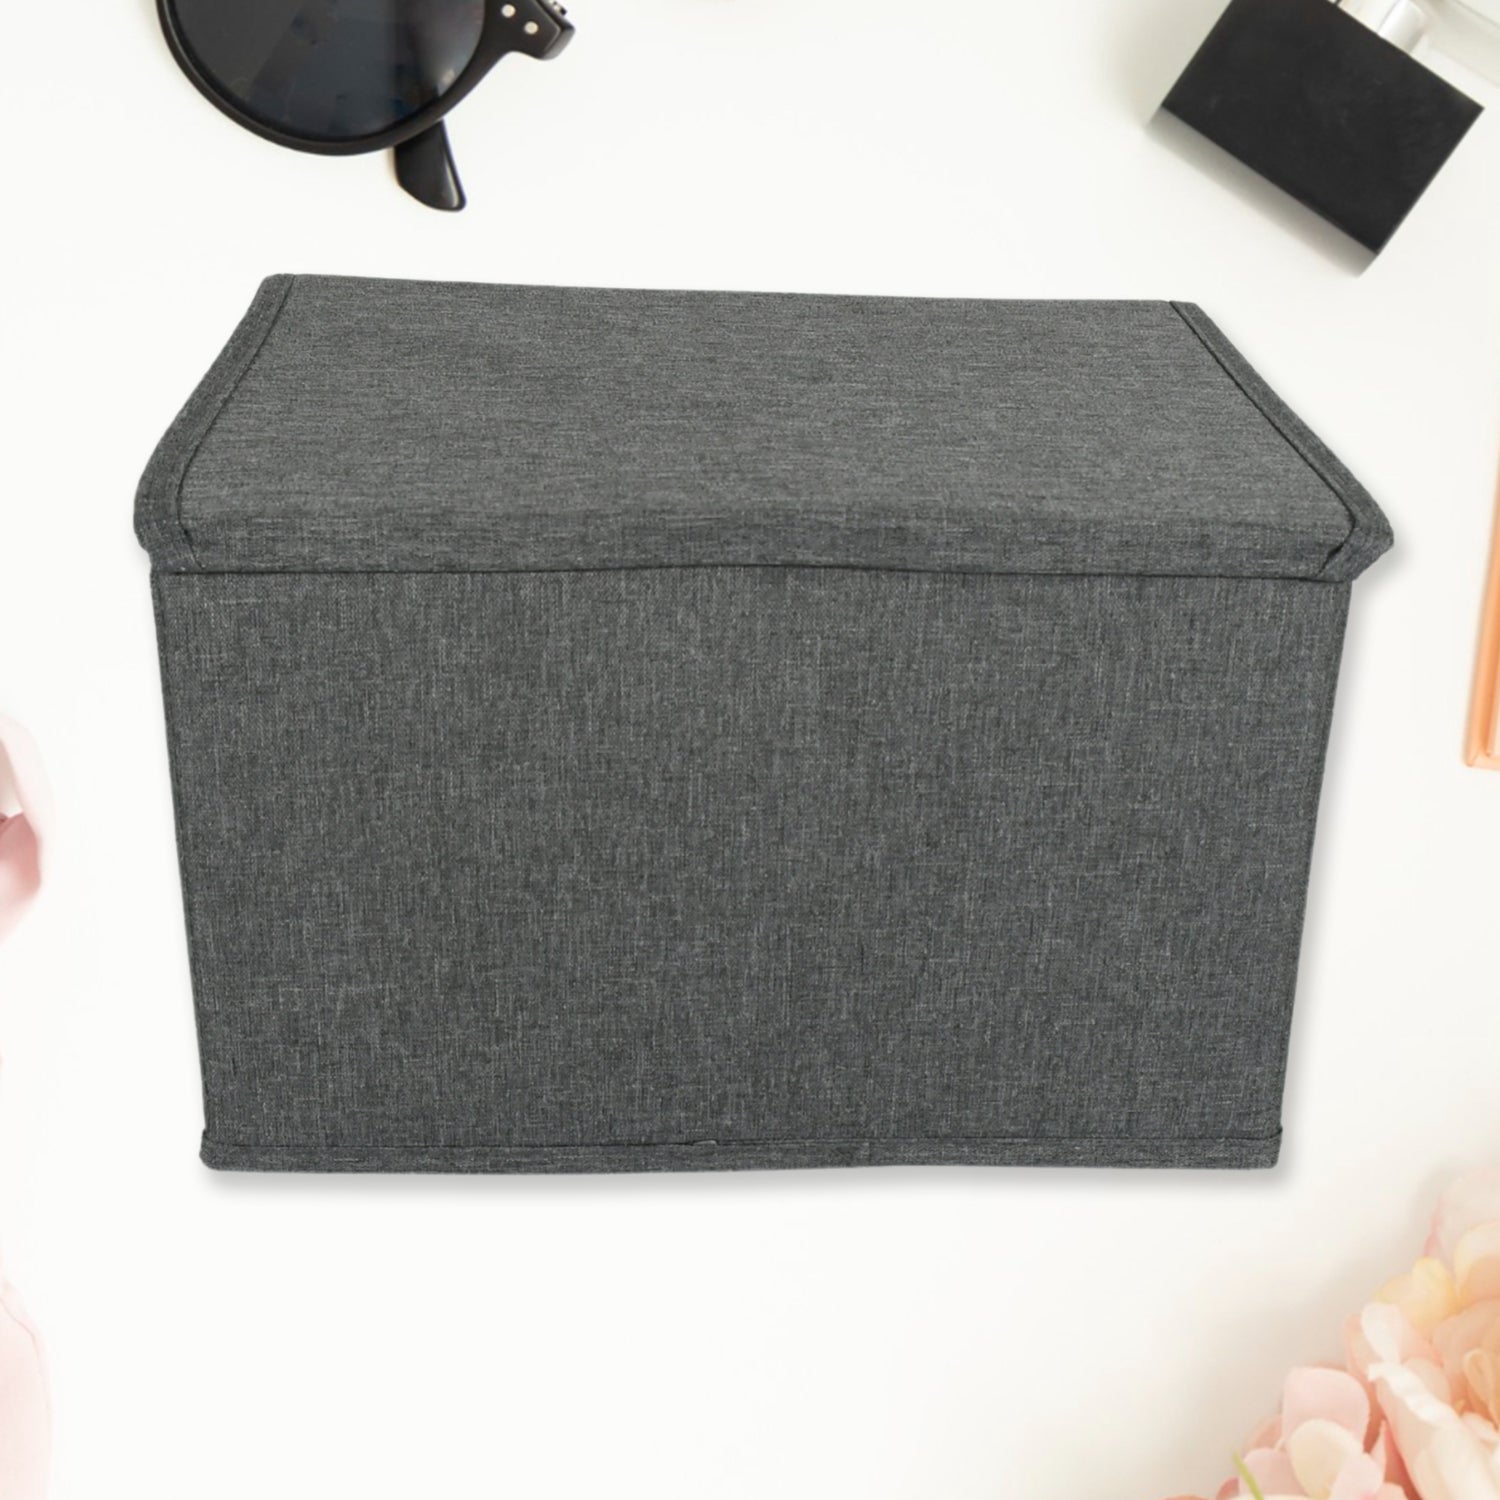 12610 Small Foldable Storage Box With Lid And Handles, Cotton And Linen Storage Bins And Baskets Organizer For Nursery, Closet, Bedroom, Home (28×20×16 Cm / 1 pc)